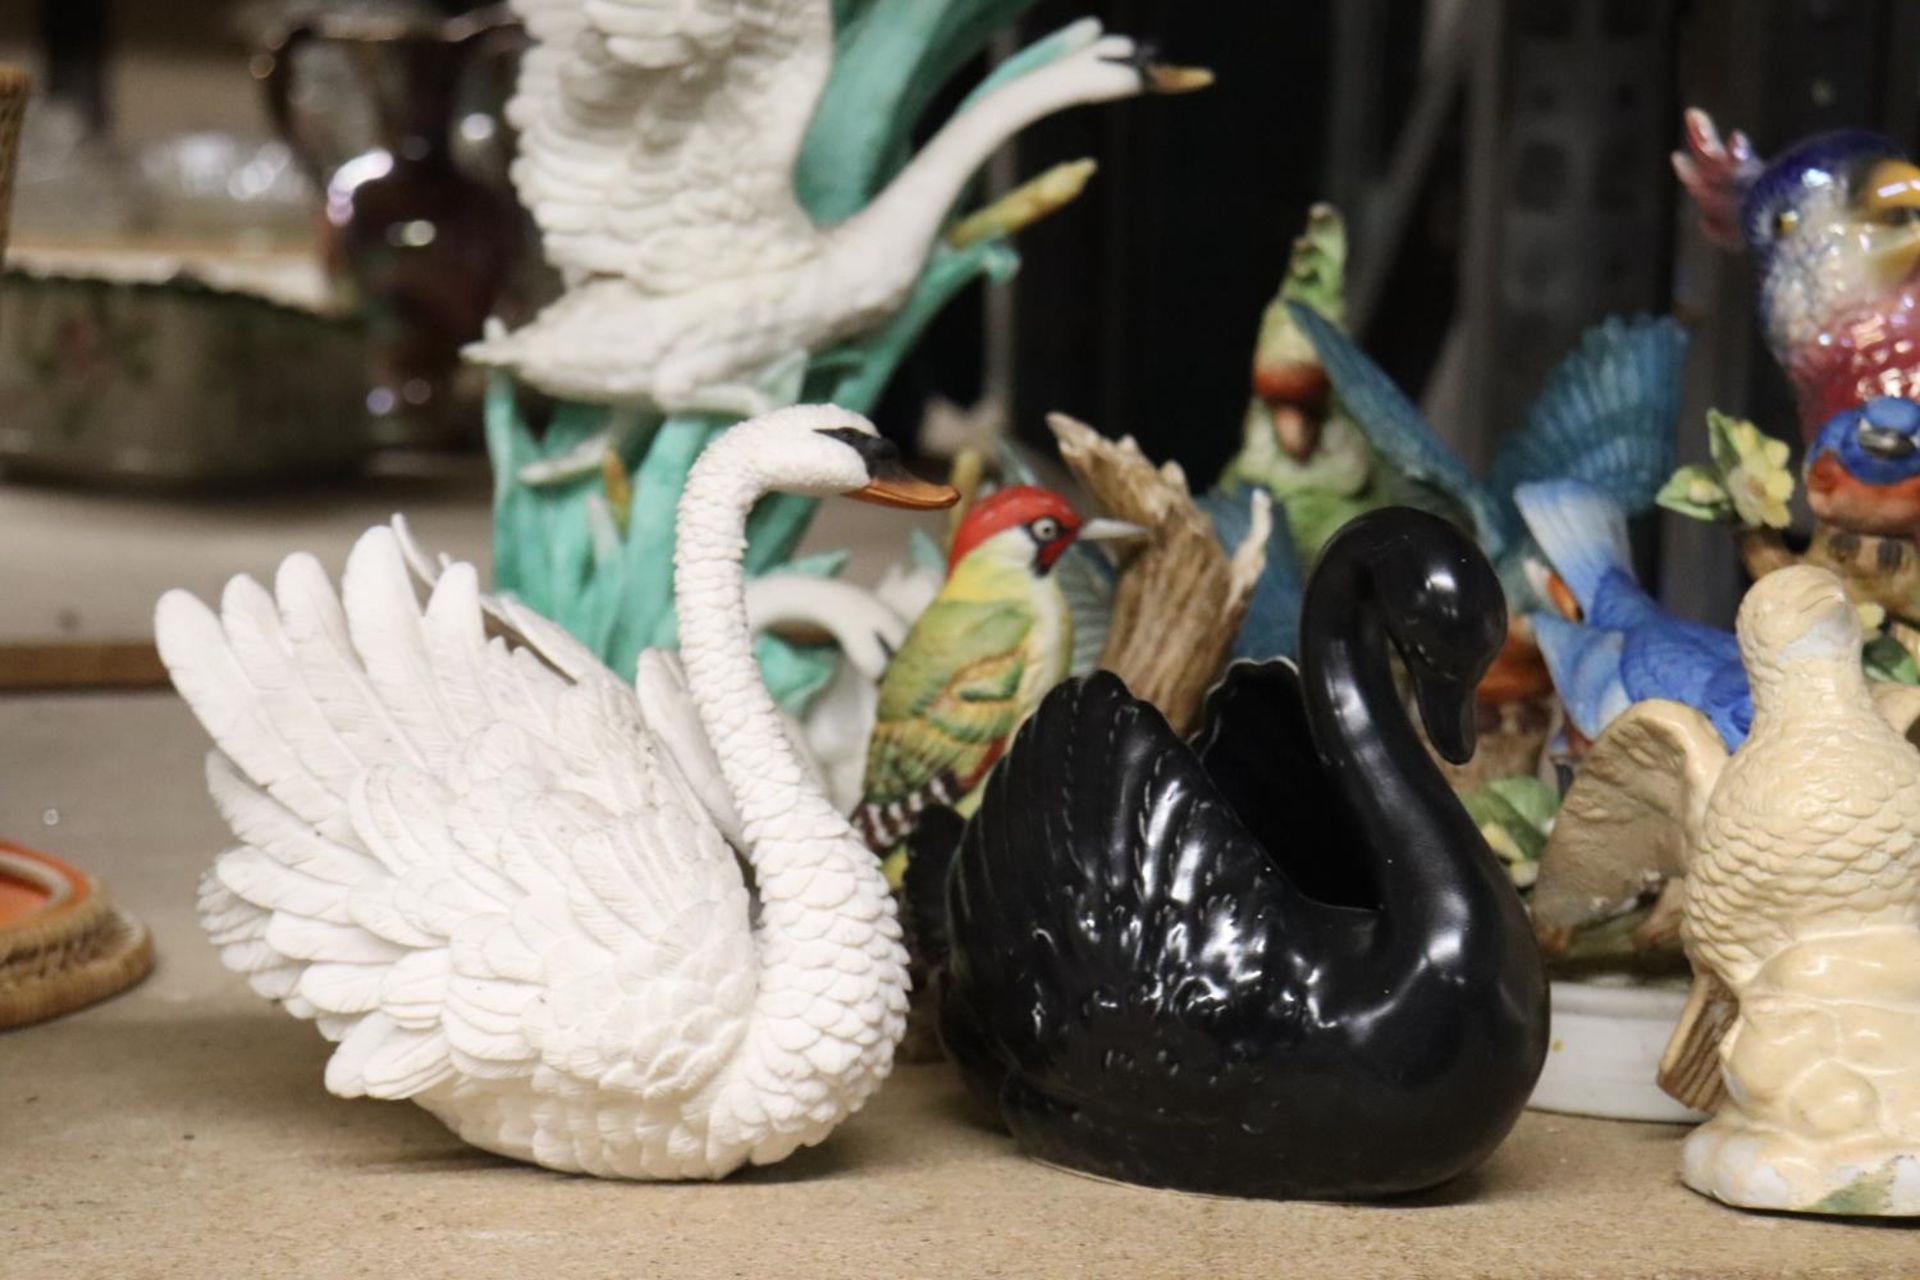 A COLLECTION OF BIRD FIGURINES TO INCLUDE SWANS, A PARROT, WOODPECKER, ETC - Image 2 of 6